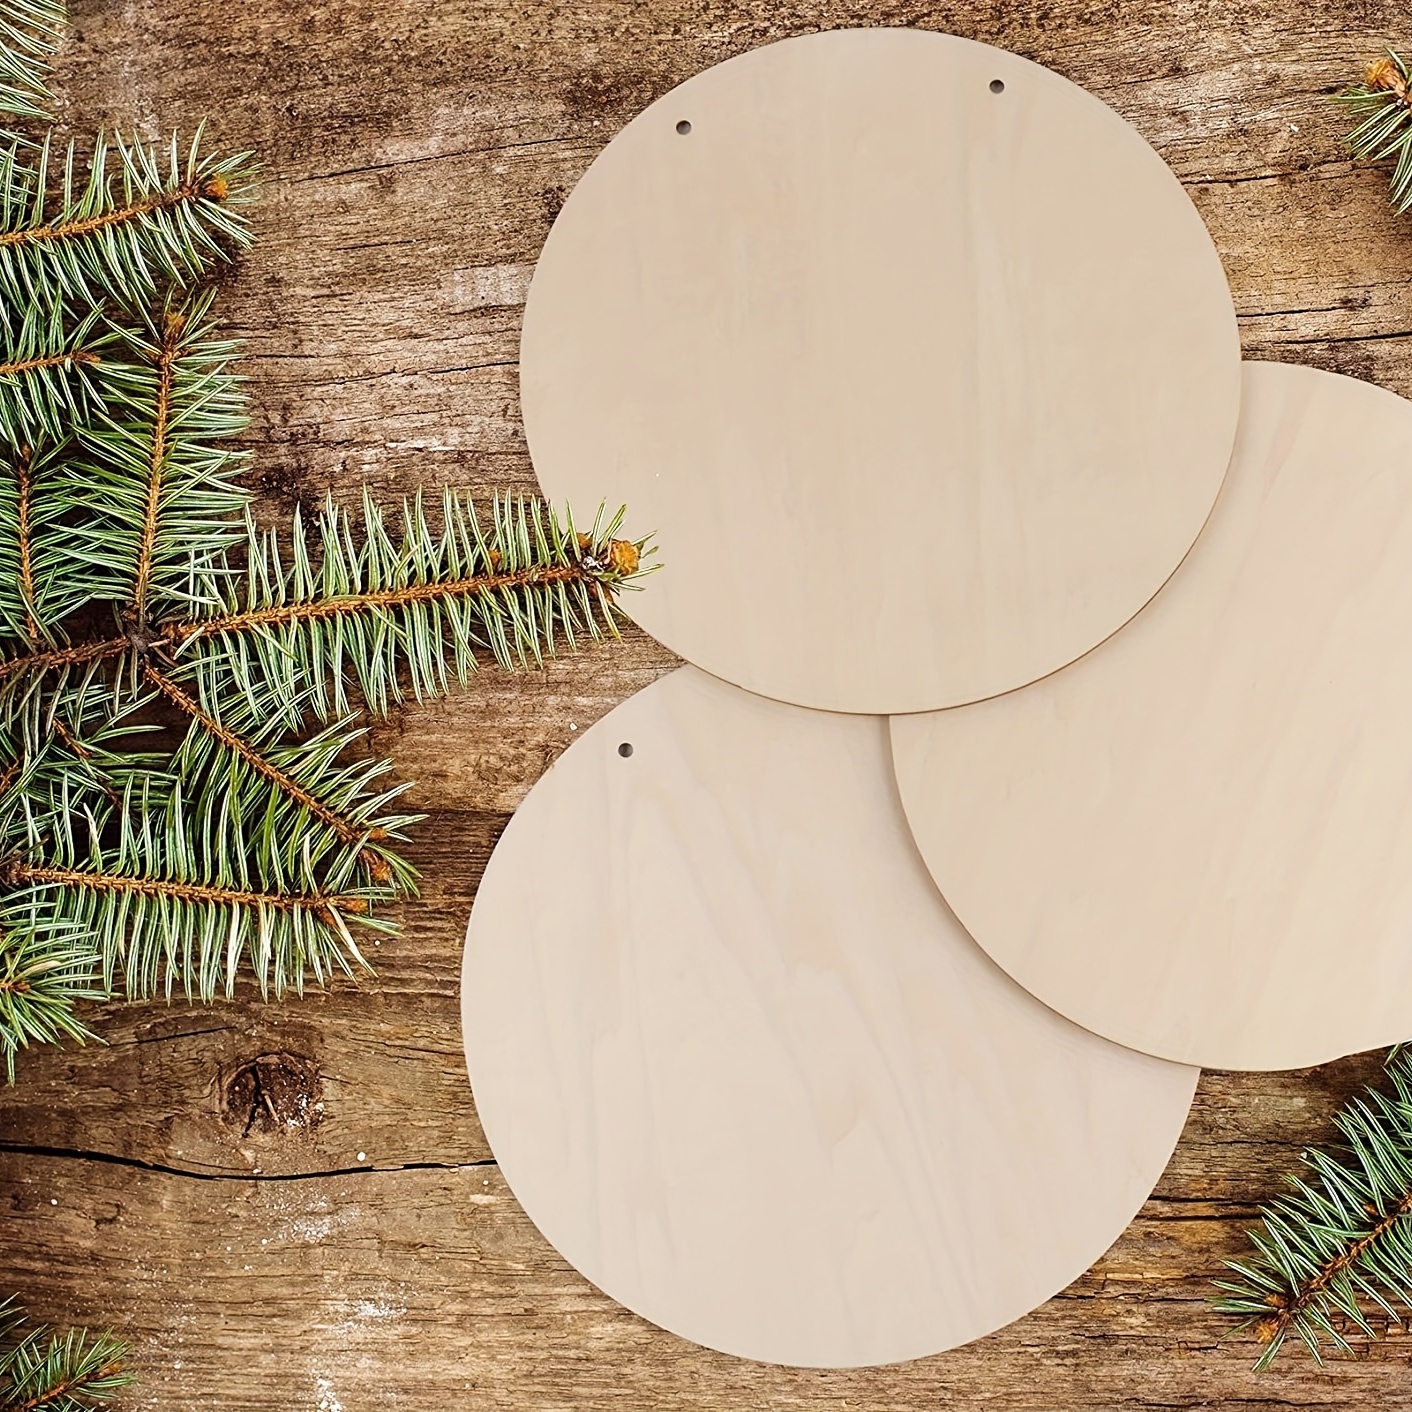 Wood Rounds Door Hanger Blanks 2-12 Inch Laser Cut Plywood Circles, Cake  Stand Rounds, DIY Wood Projects